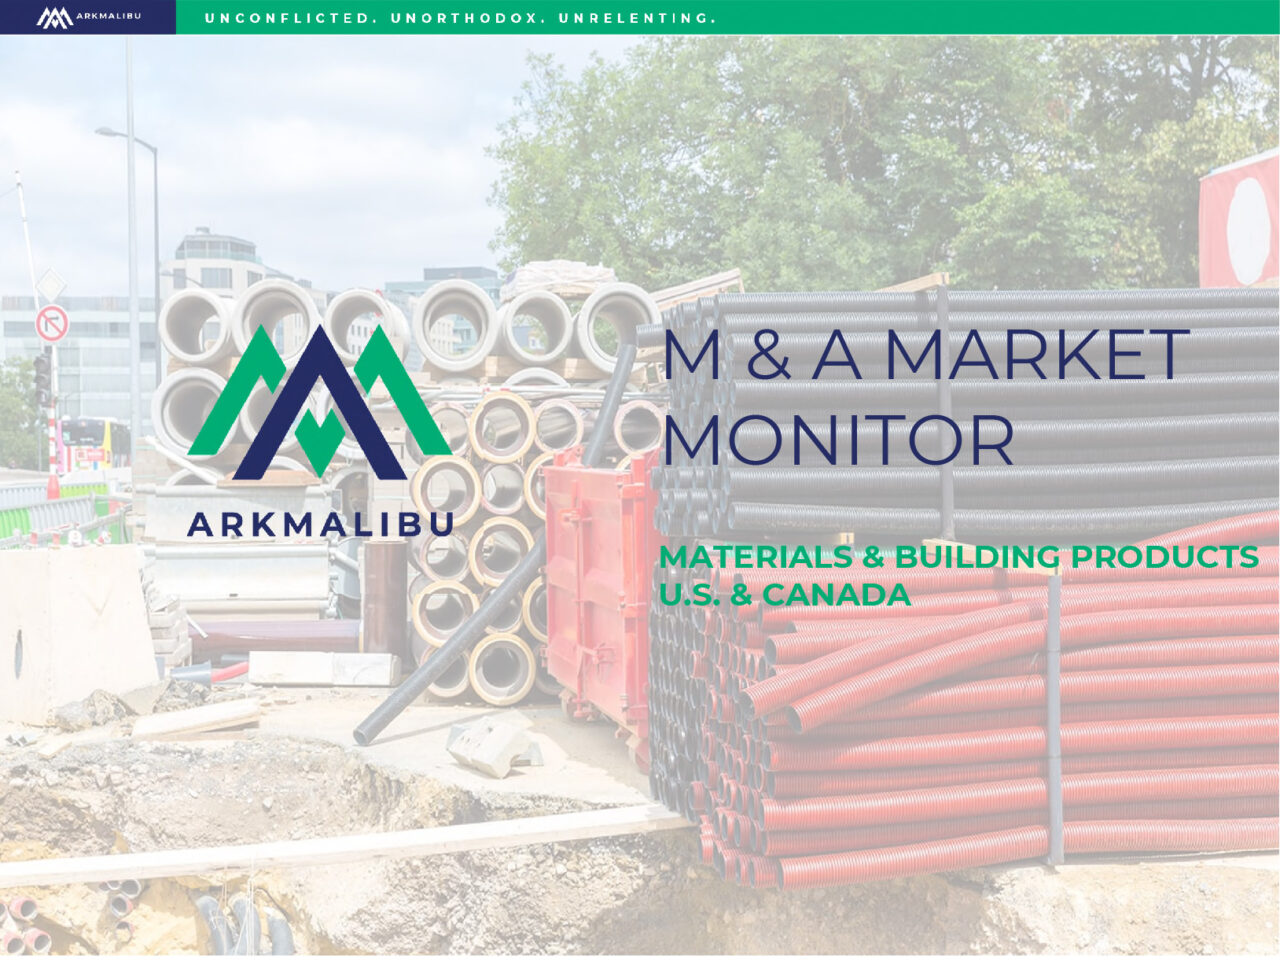 Market Monitor Cover for Materials & Building Products. Faded Image of a stockpile of building materials in the background